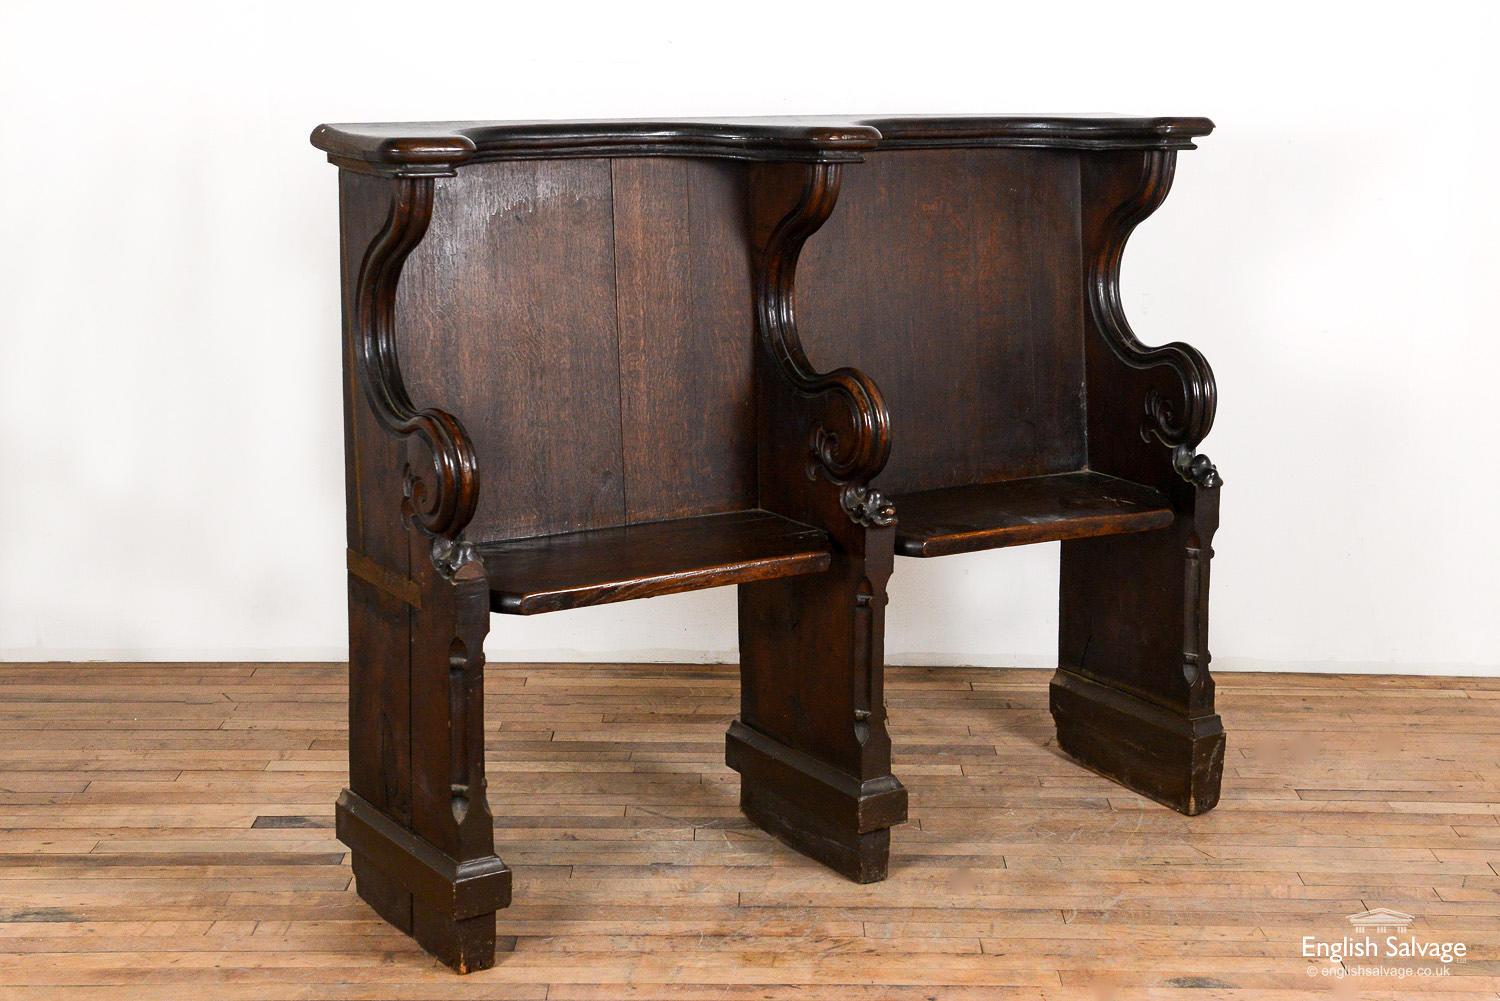 Antique Victorian oak double seated oak choir stall / bench / pew. The stall has attractive scrolling curved arms and chamfering to the front edges of the legs. Age, wear-related surface scratches and nicks are visible throughout and the left arm